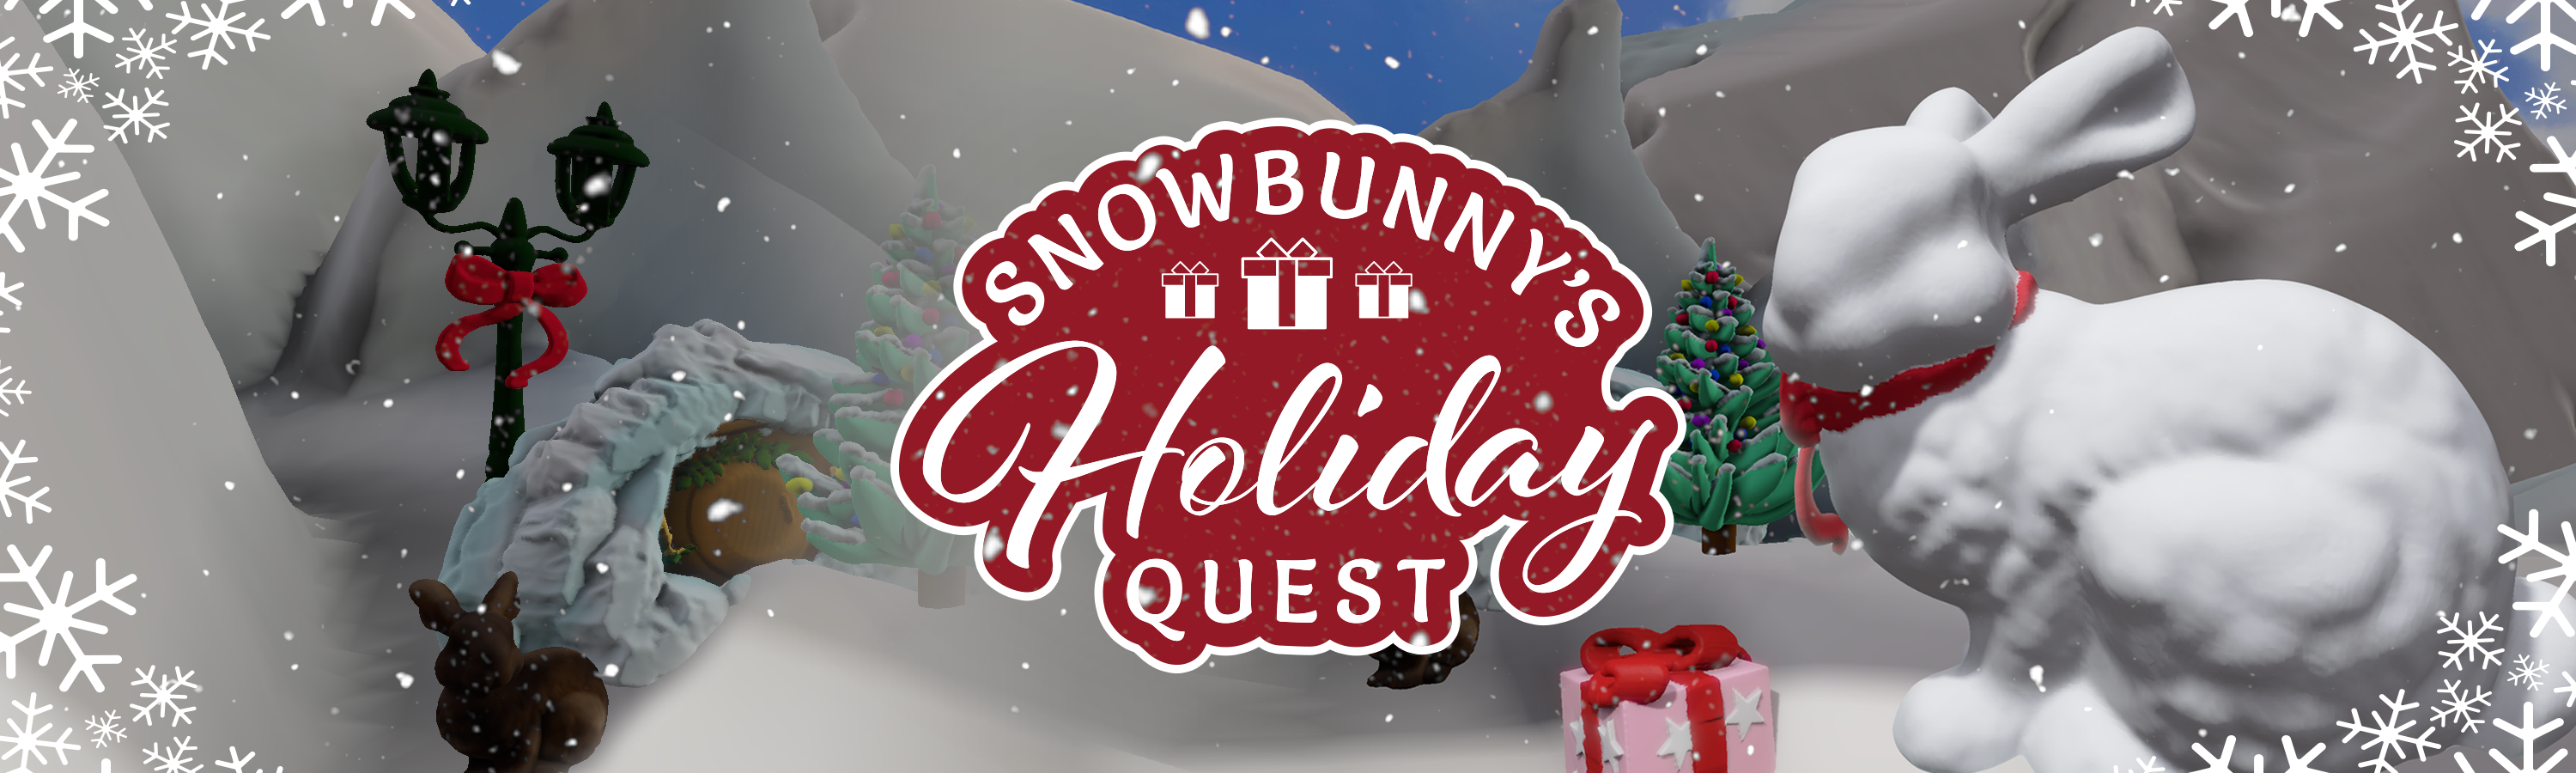 SnowBunny's Holiday Quest (VR)